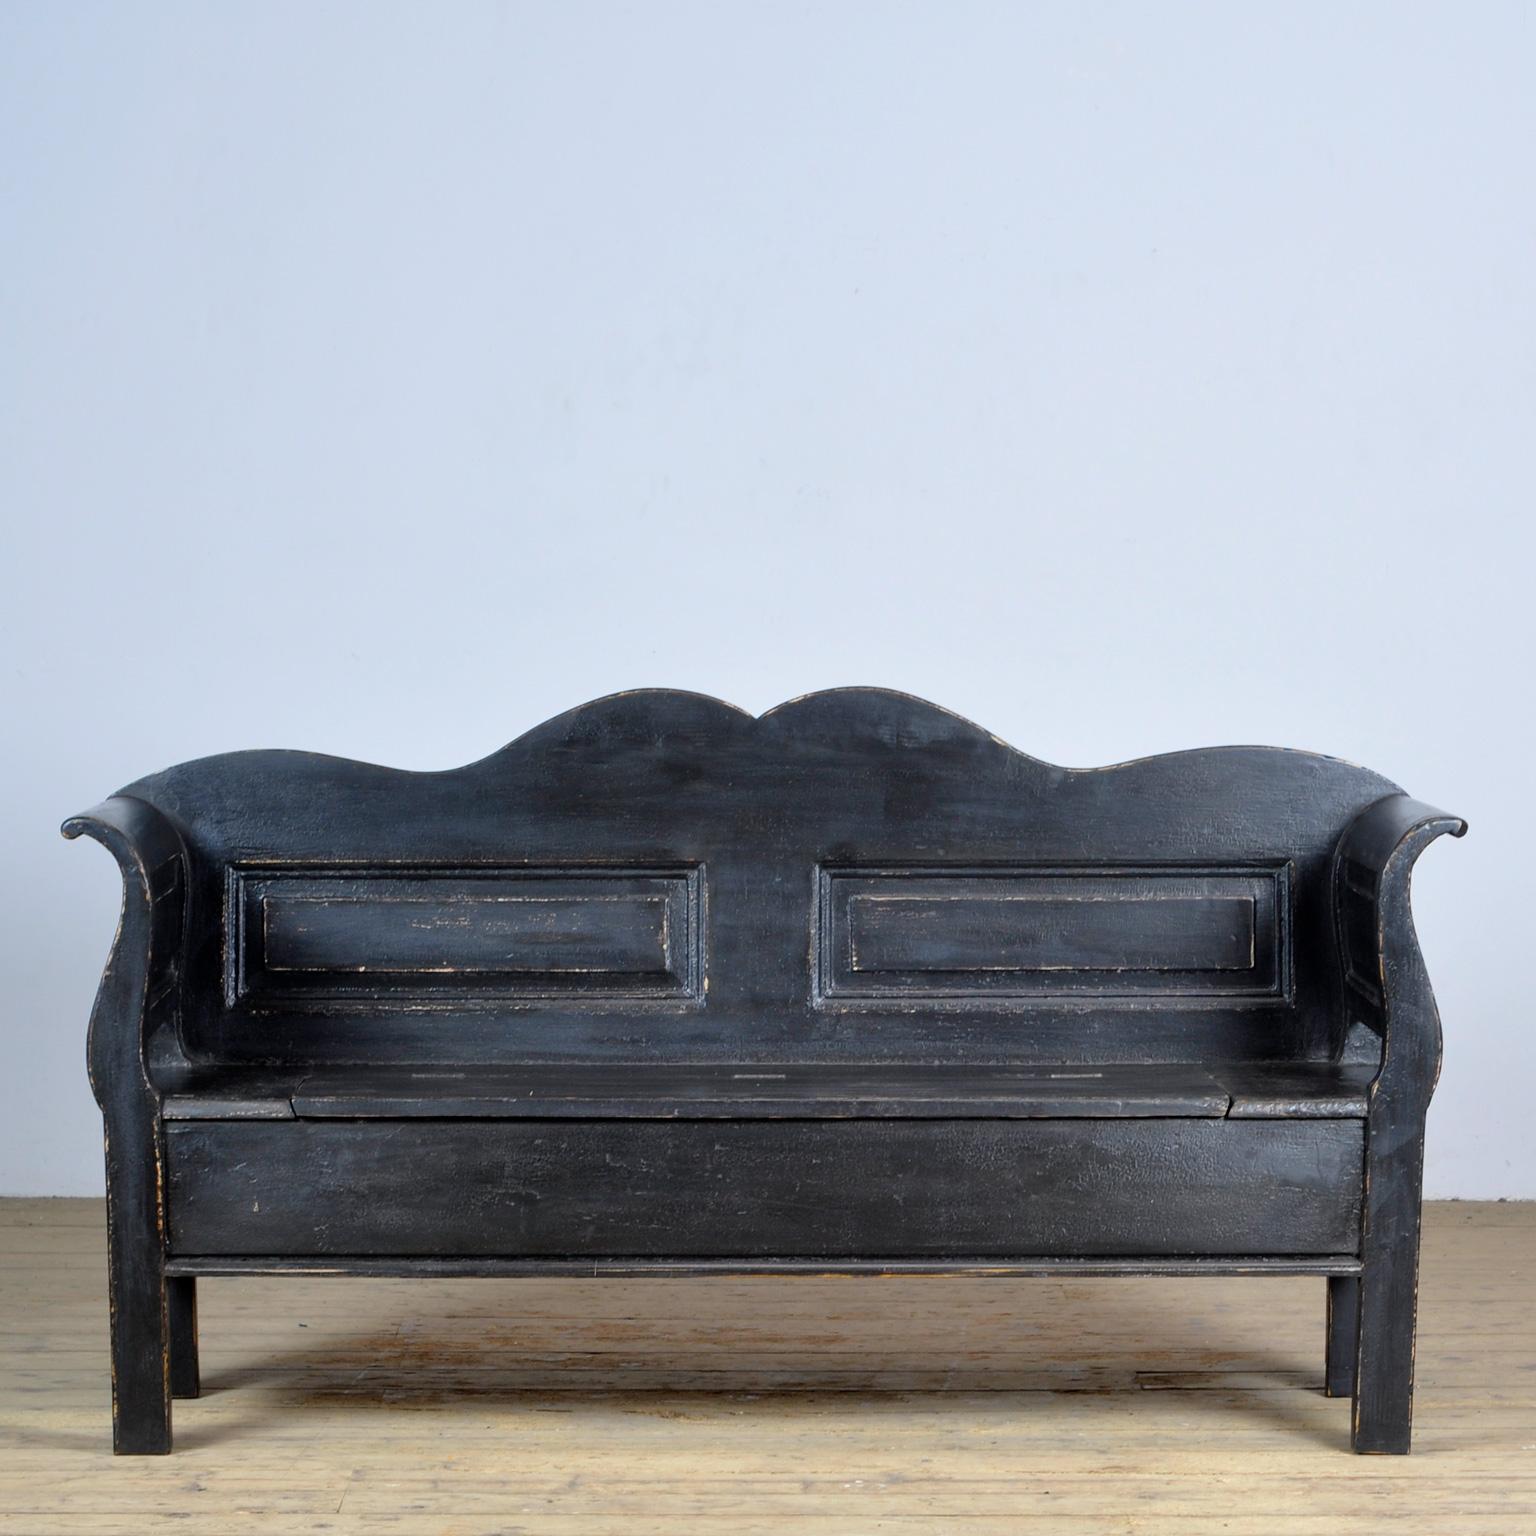 A charming bench from hungary with the original paint. Over time and use, the black paint has been worn away in places to the wood. With storage space under the seat. The bench is stable and sturdy. Free of woodworm. 